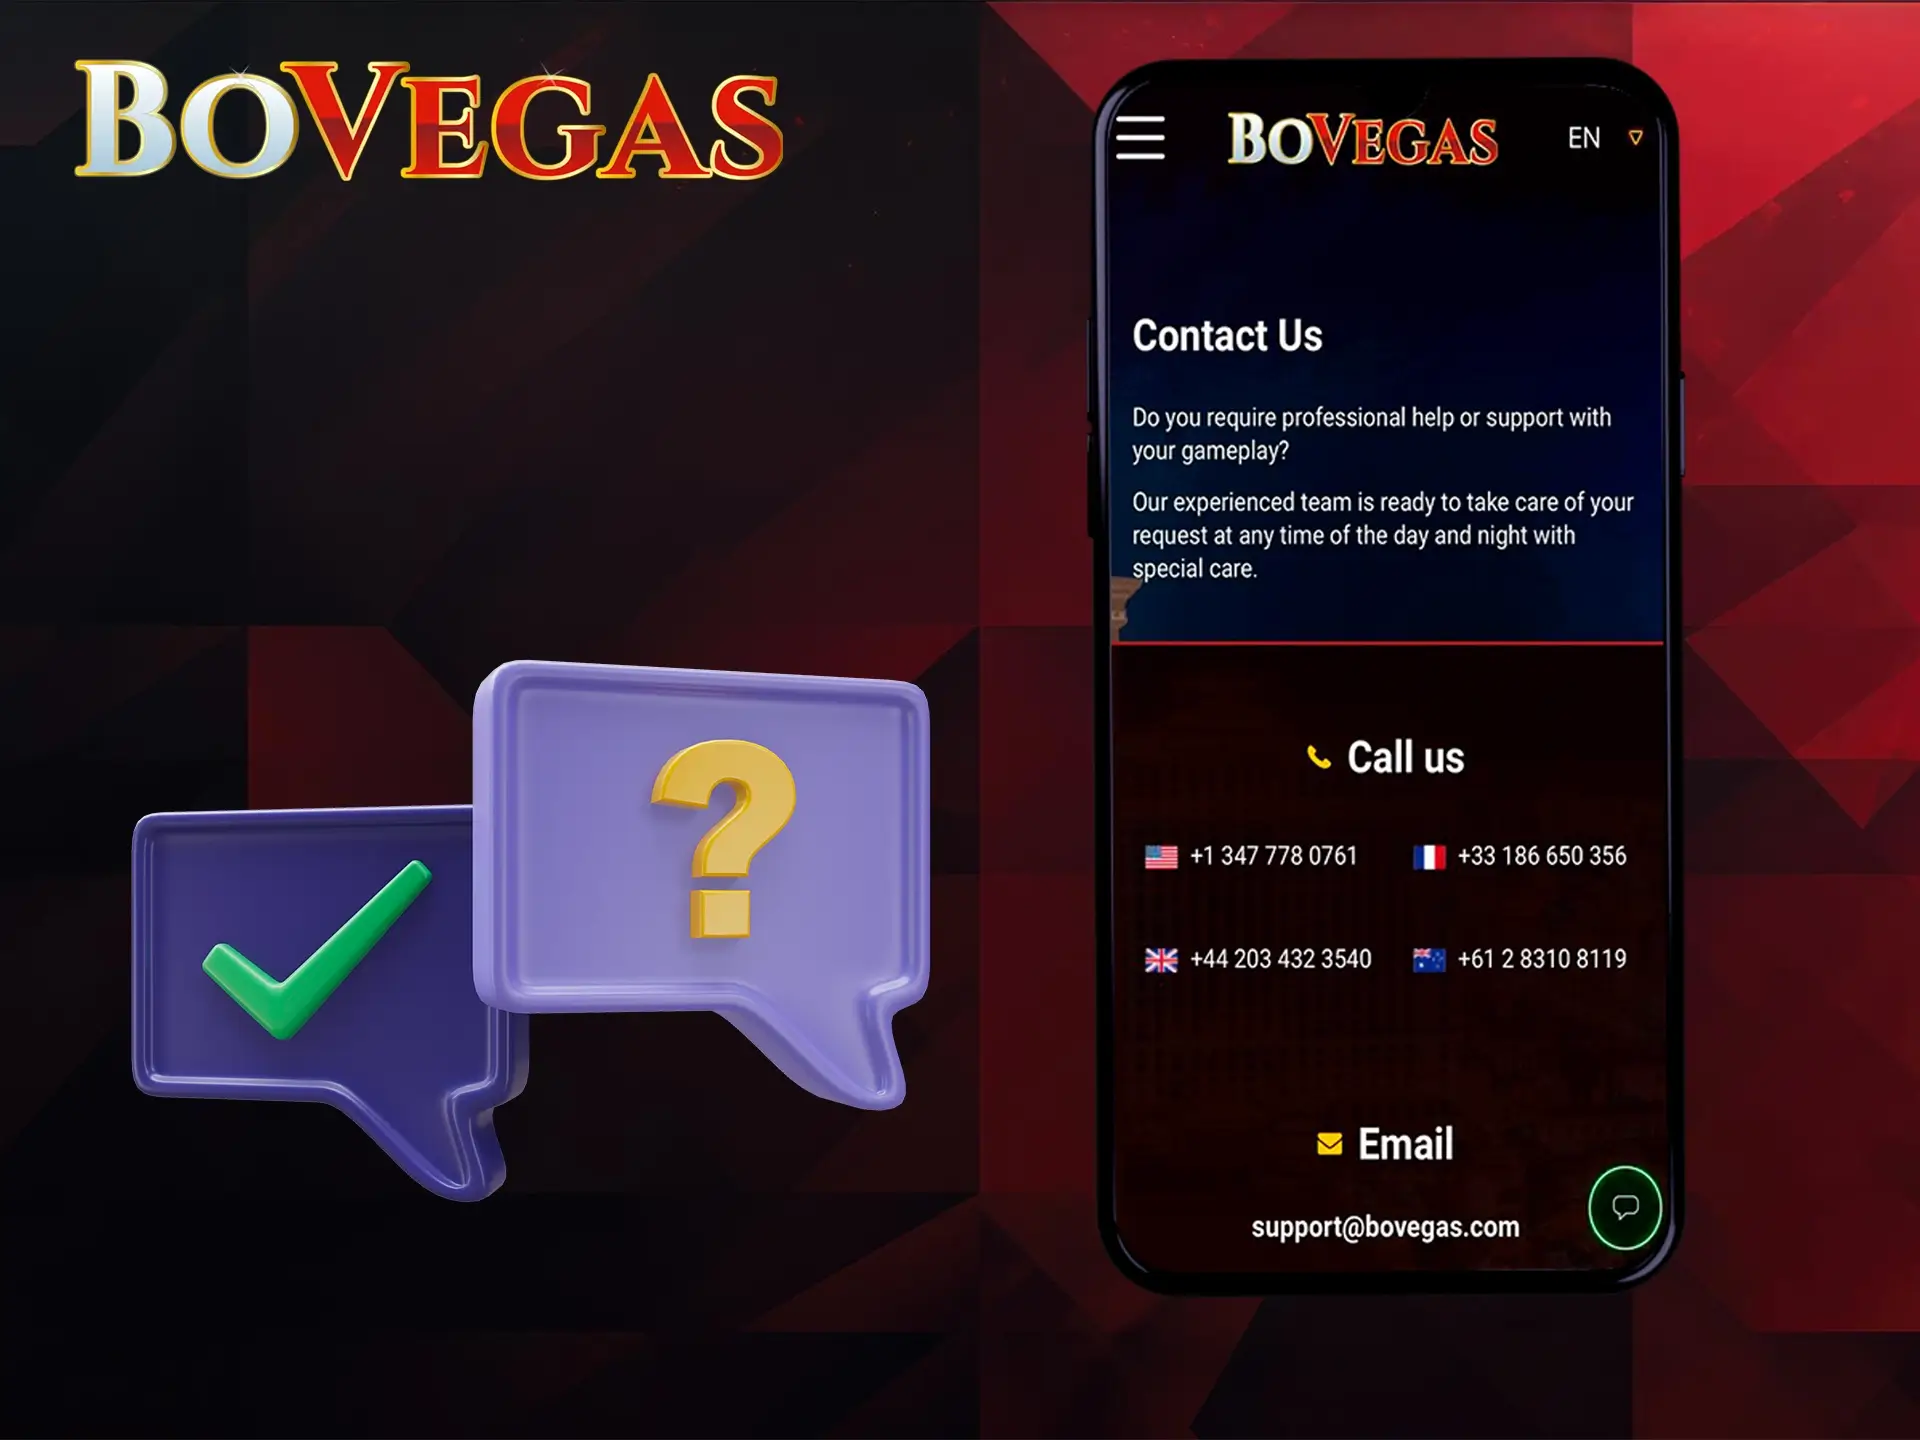 Contact the BoVegas support team if you have any issues with the app.